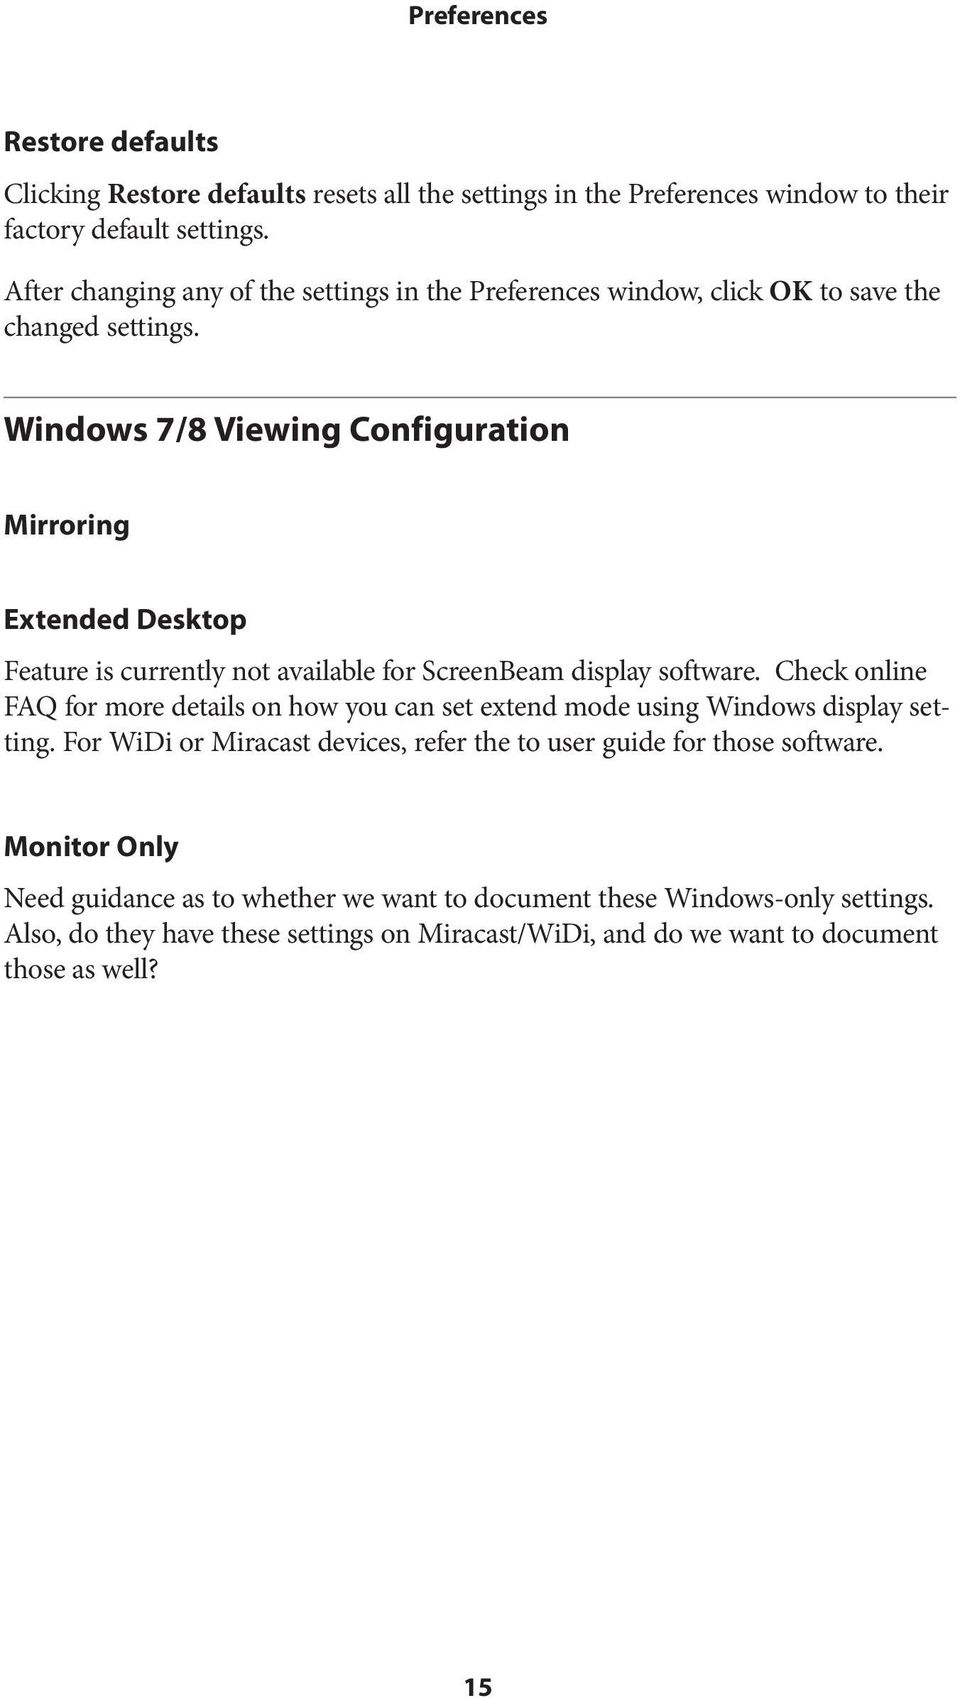 Windows 7/8 Viewing Configuration Mirroring Extended Desktop Feature is currently not available for ScreenBeam display software.